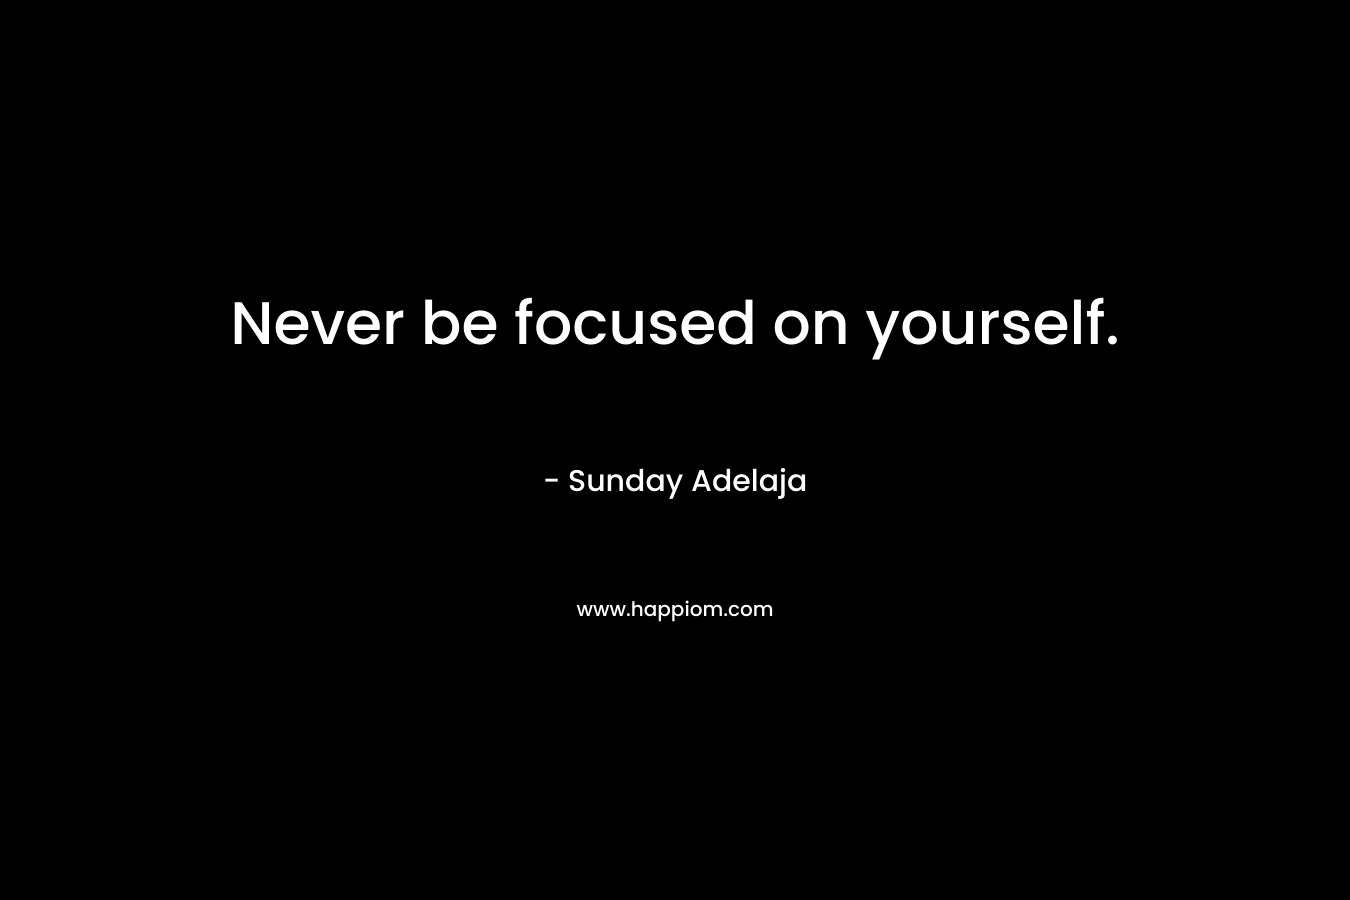 Never be focused on yourself.